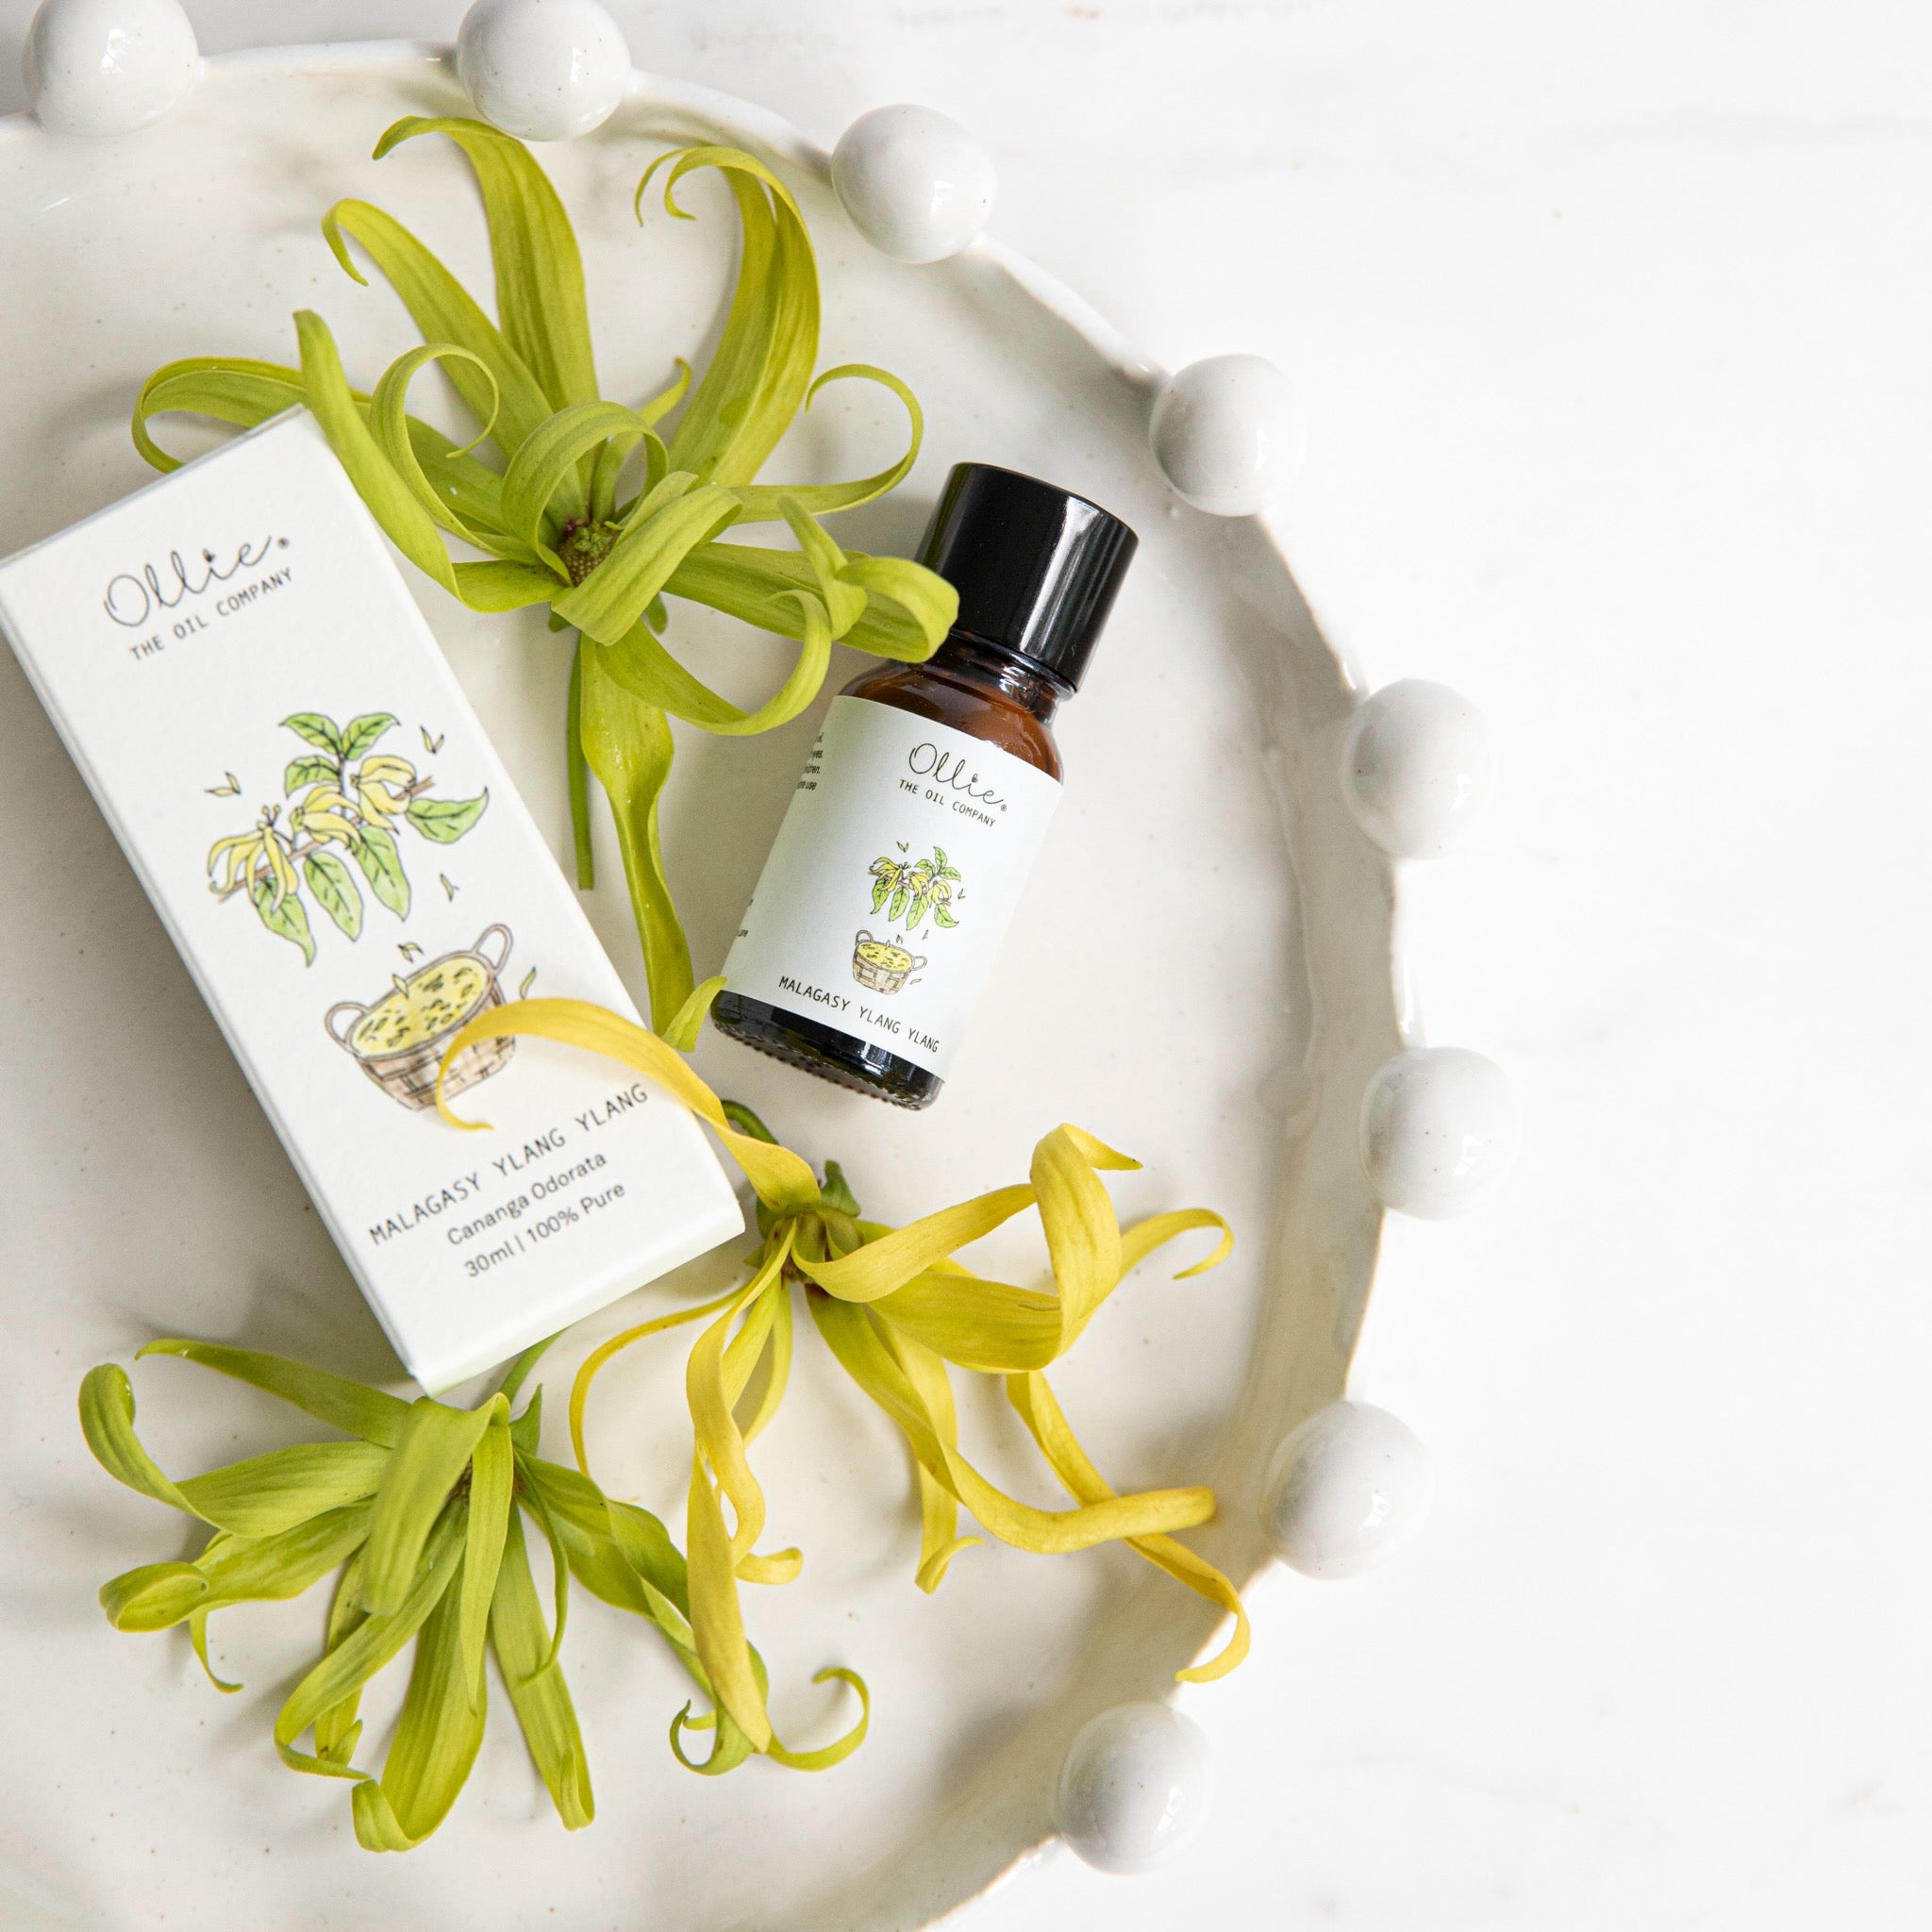 Ollie Malagasy Ylang Ylang Oil | Home fragrances | The Green Collective SG